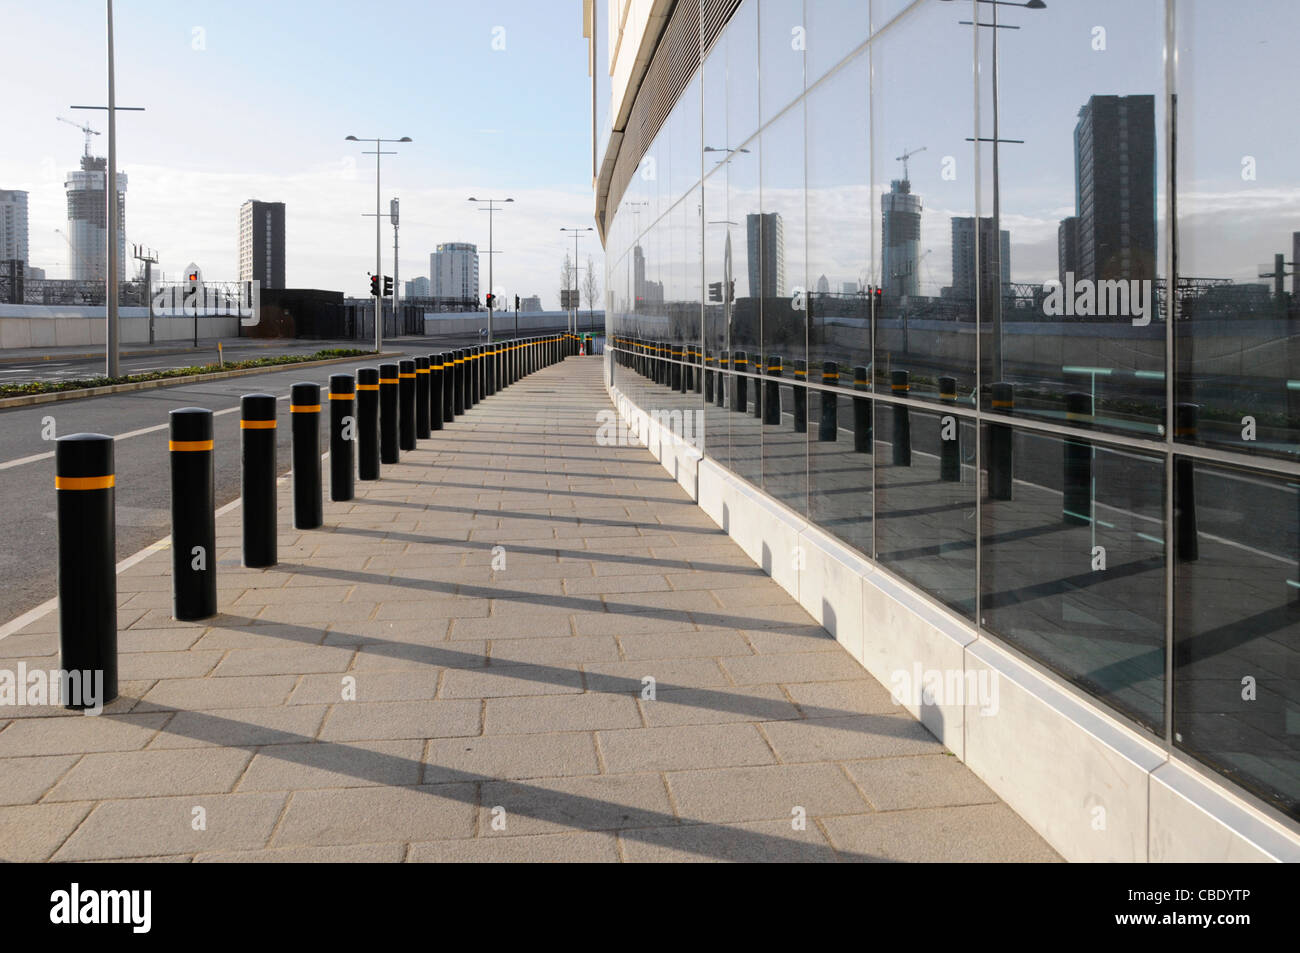 Long line of security bollards protection of pavement & buildings outside Stratford City Westfield shopping centre reflected in glass East London UK Stock Photo